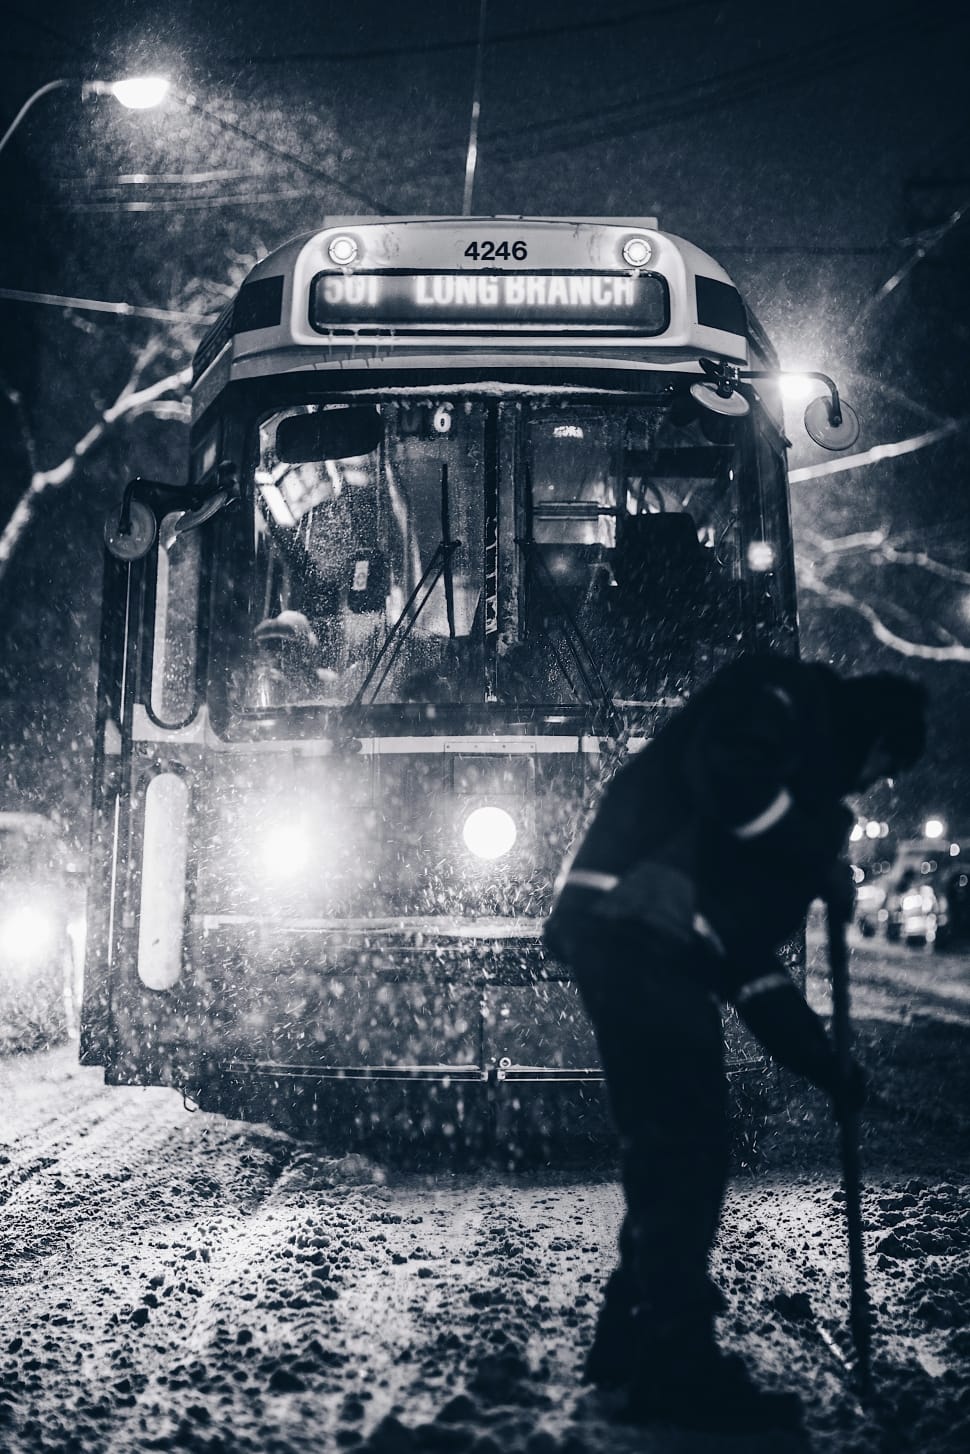 grayscale photo of person in front of tram shoveling snow during nighttime preview